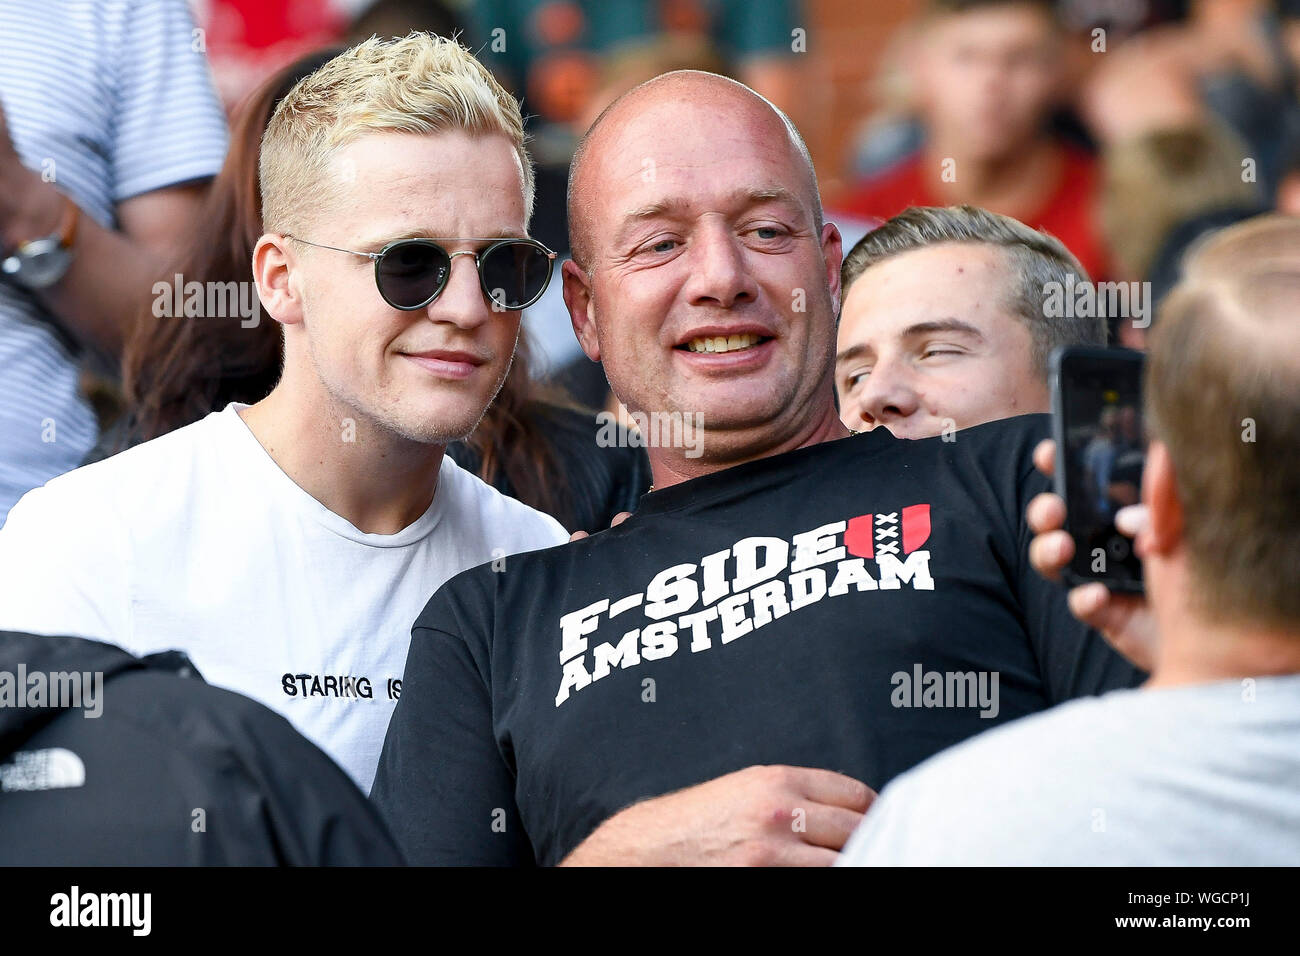 Page 15 - Van De Beek Netherlands High Resolution Stock Photography and  Images - Alamy